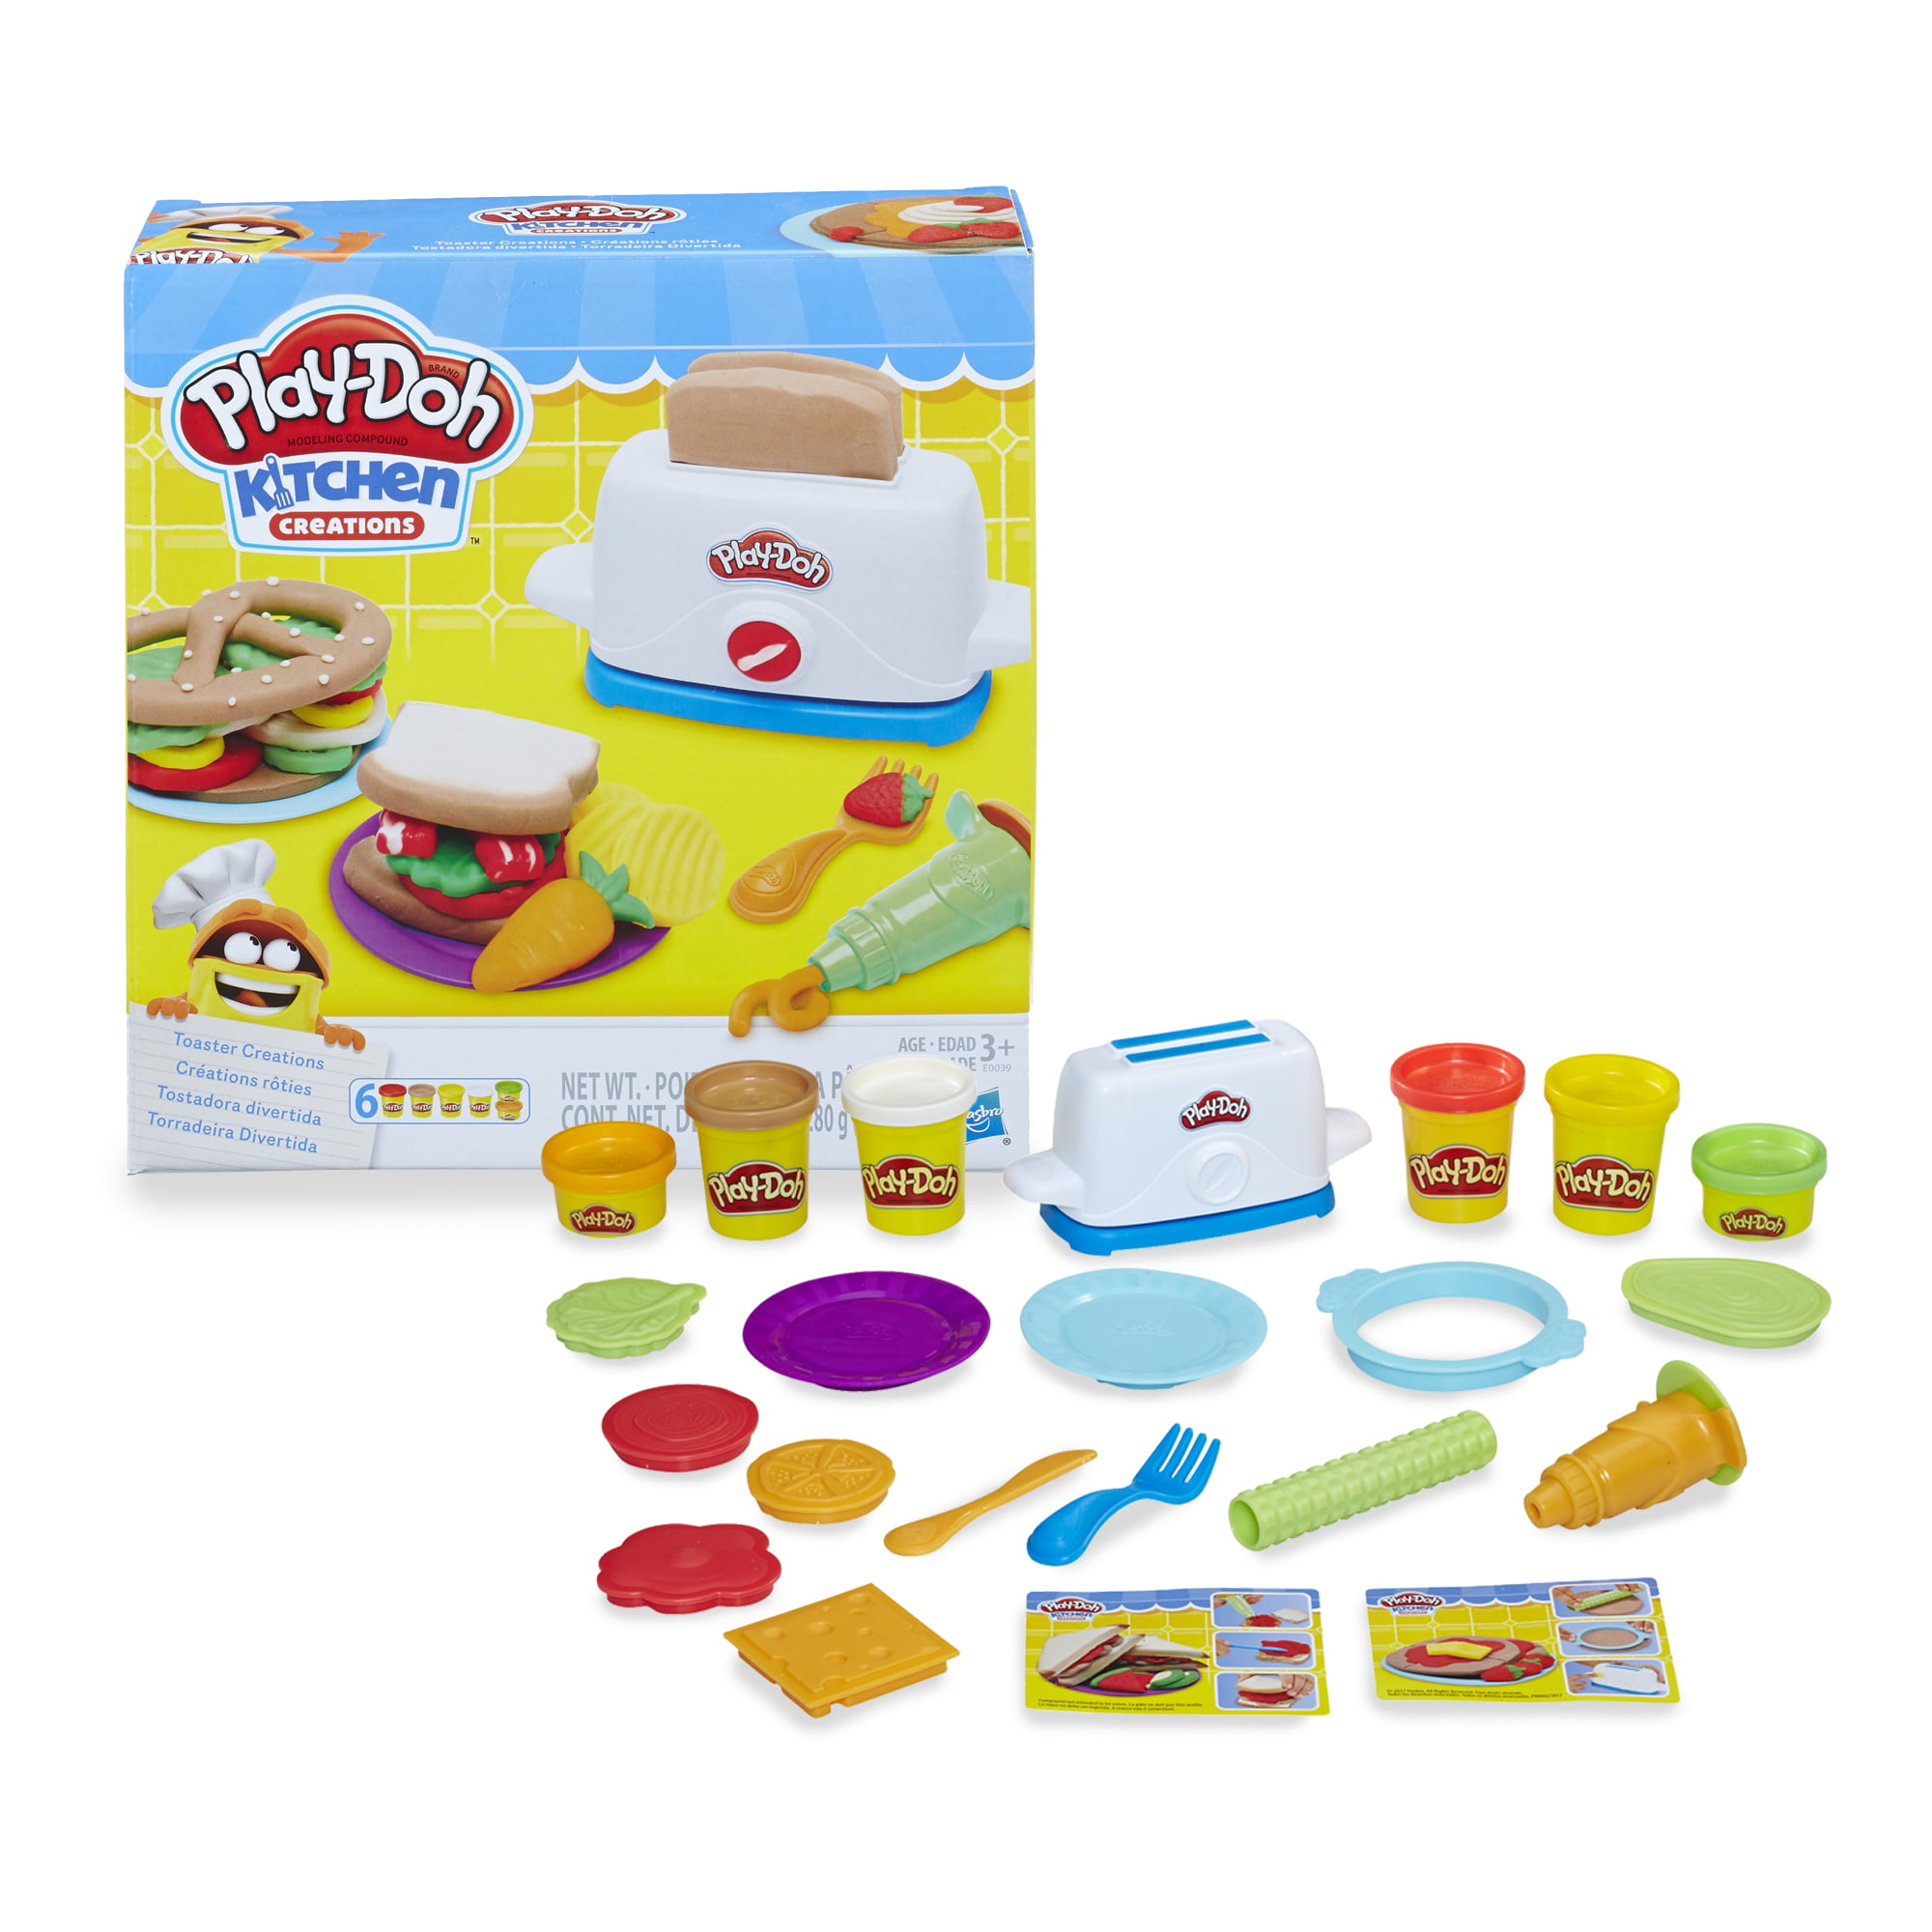 X1 Play-Doh Kitchen Creations Canister Play Food Set With 2 Non-toxic Colors for sale online